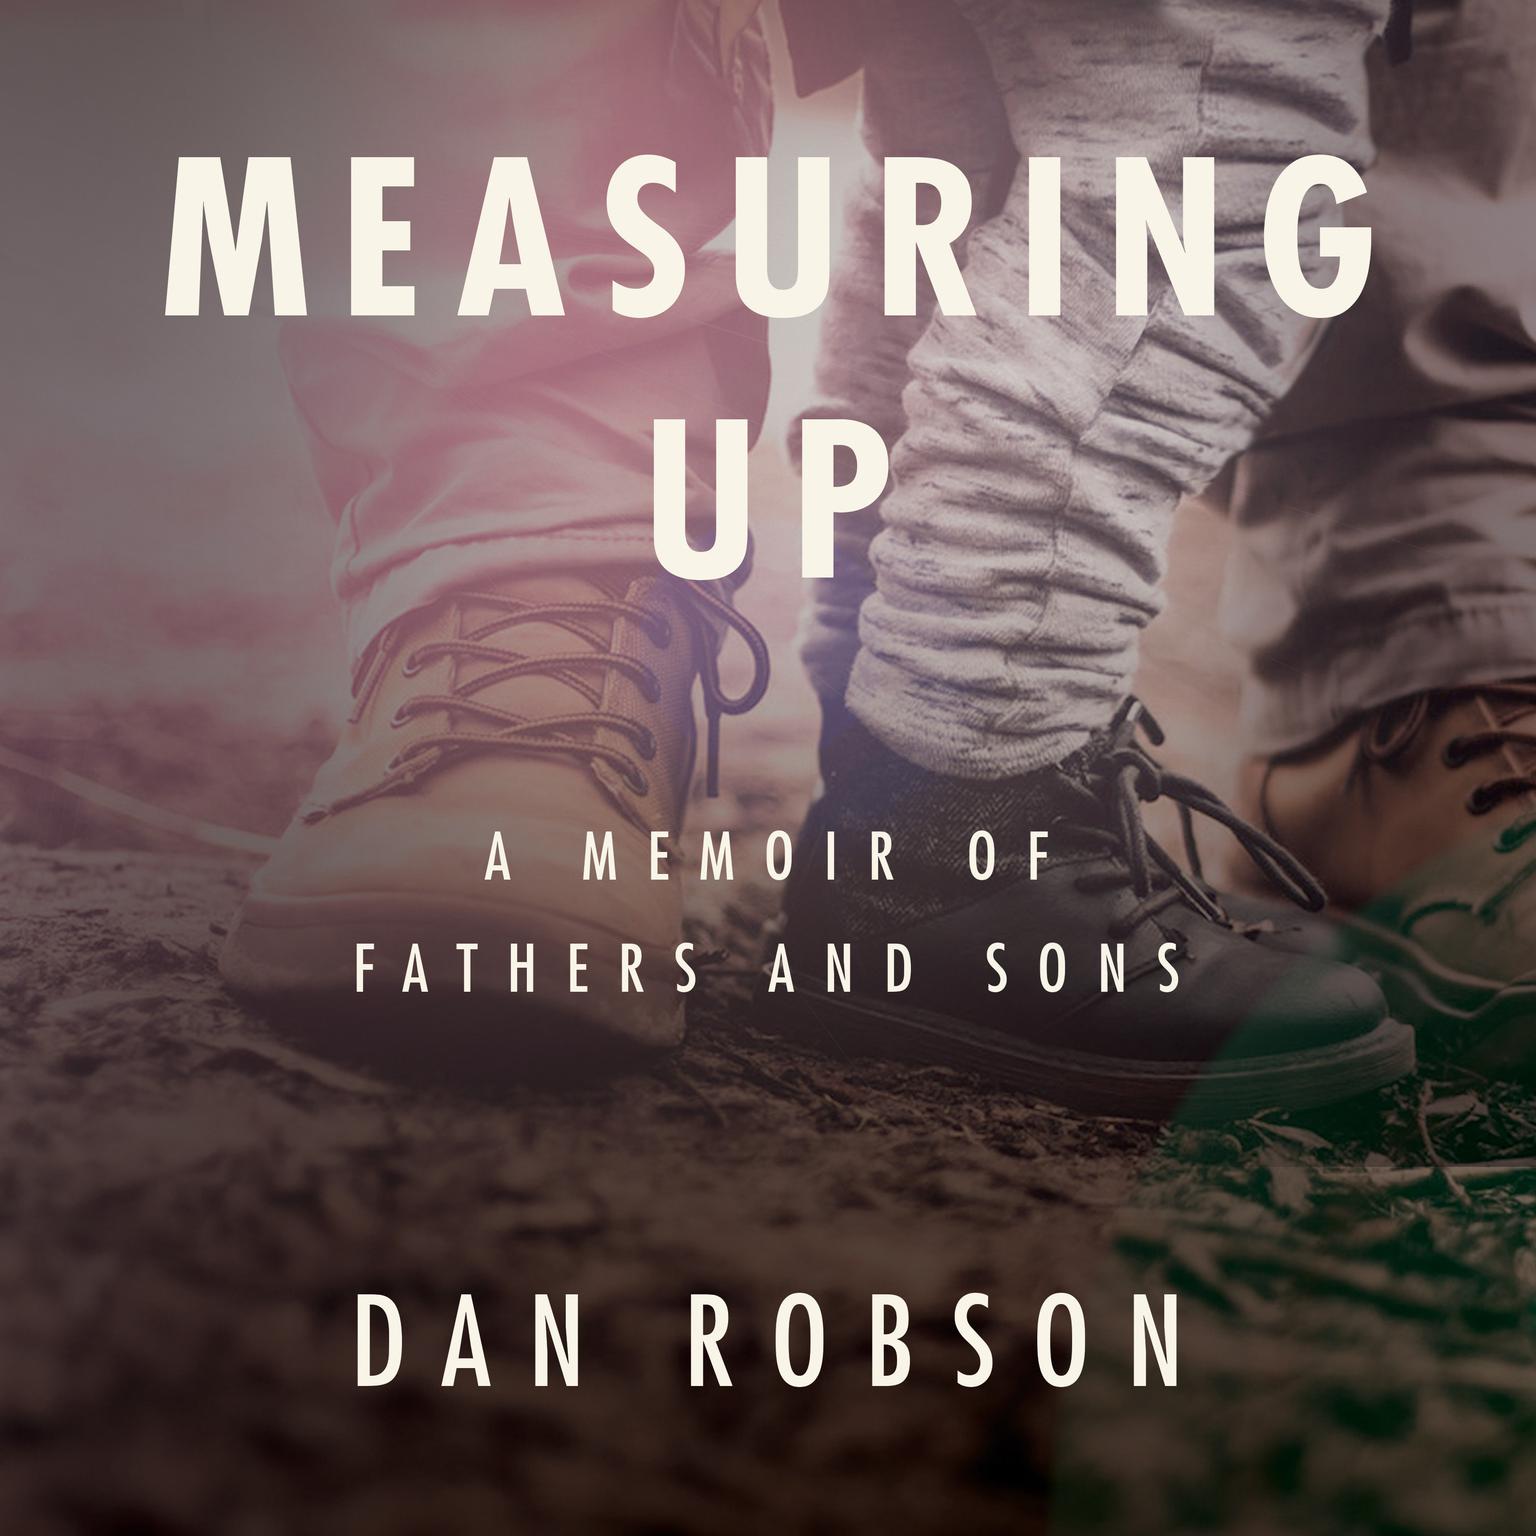 Measuring Up: A Memoir of Fathers and Sons Audiobook, by Dan Robson